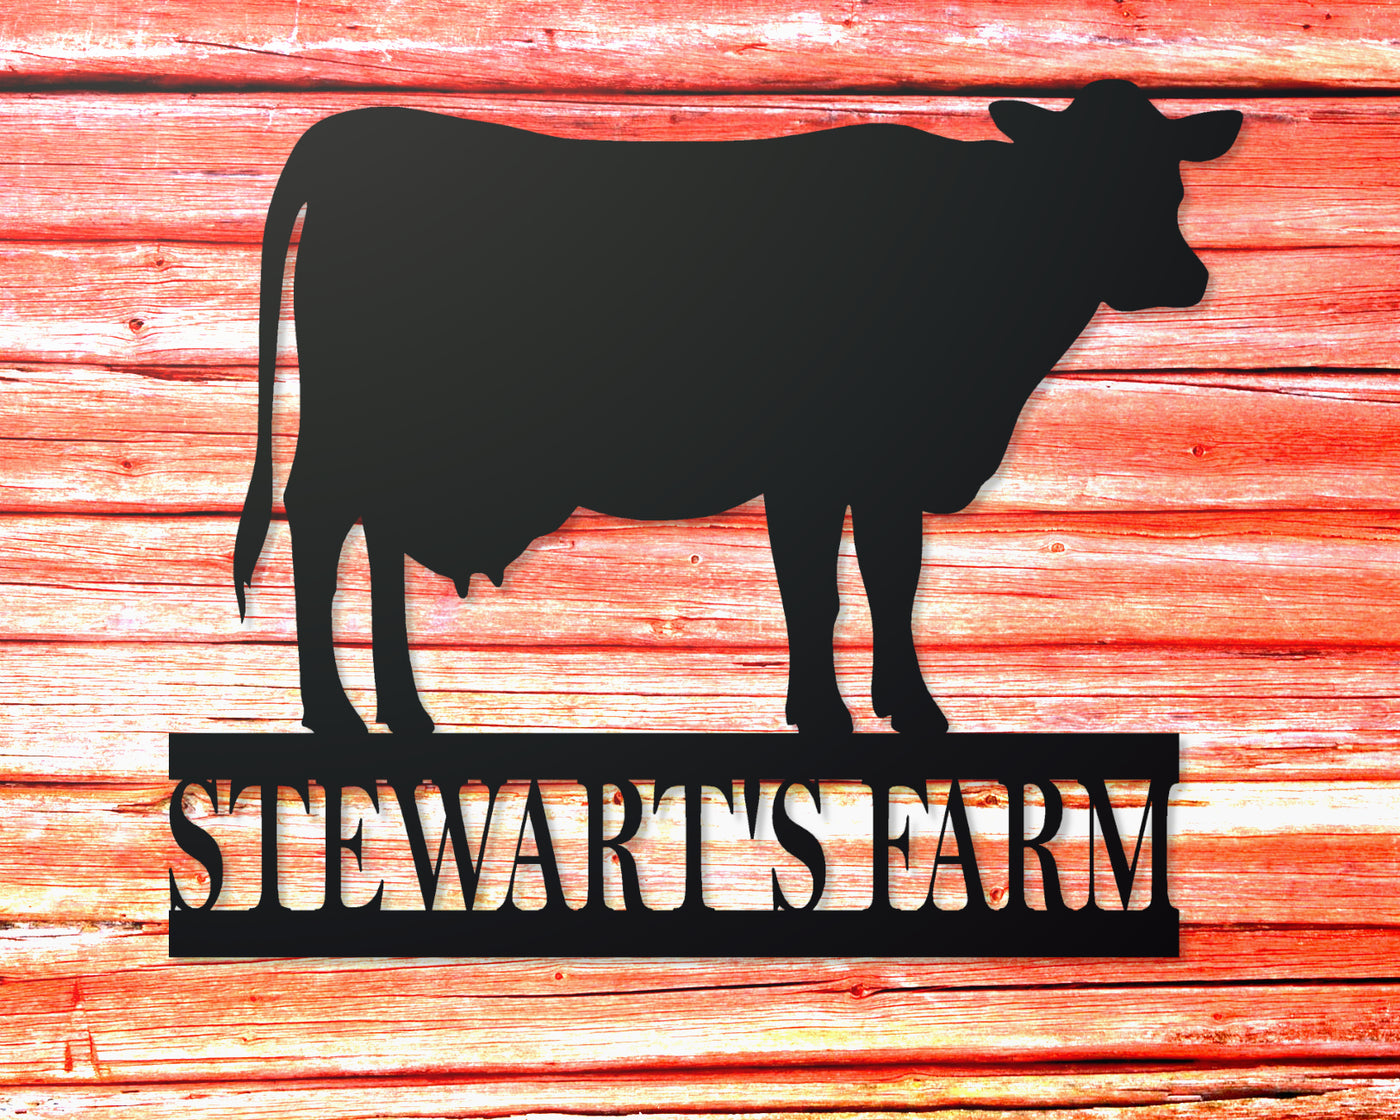 Personalized Cow Metal Sign - Madison Iron and Wood - Personalized sign - metal outdoor decor - Steel deocrations - american made products - veteran owned business products - fencing decorations - fencing supplies - custom wall decorations - personalized wall signs - steel - decorative post caps - steel post caps - metal post caps - brackets - structural brackets - home improvement - easter - easter decorations - easter gift - easter yard decor